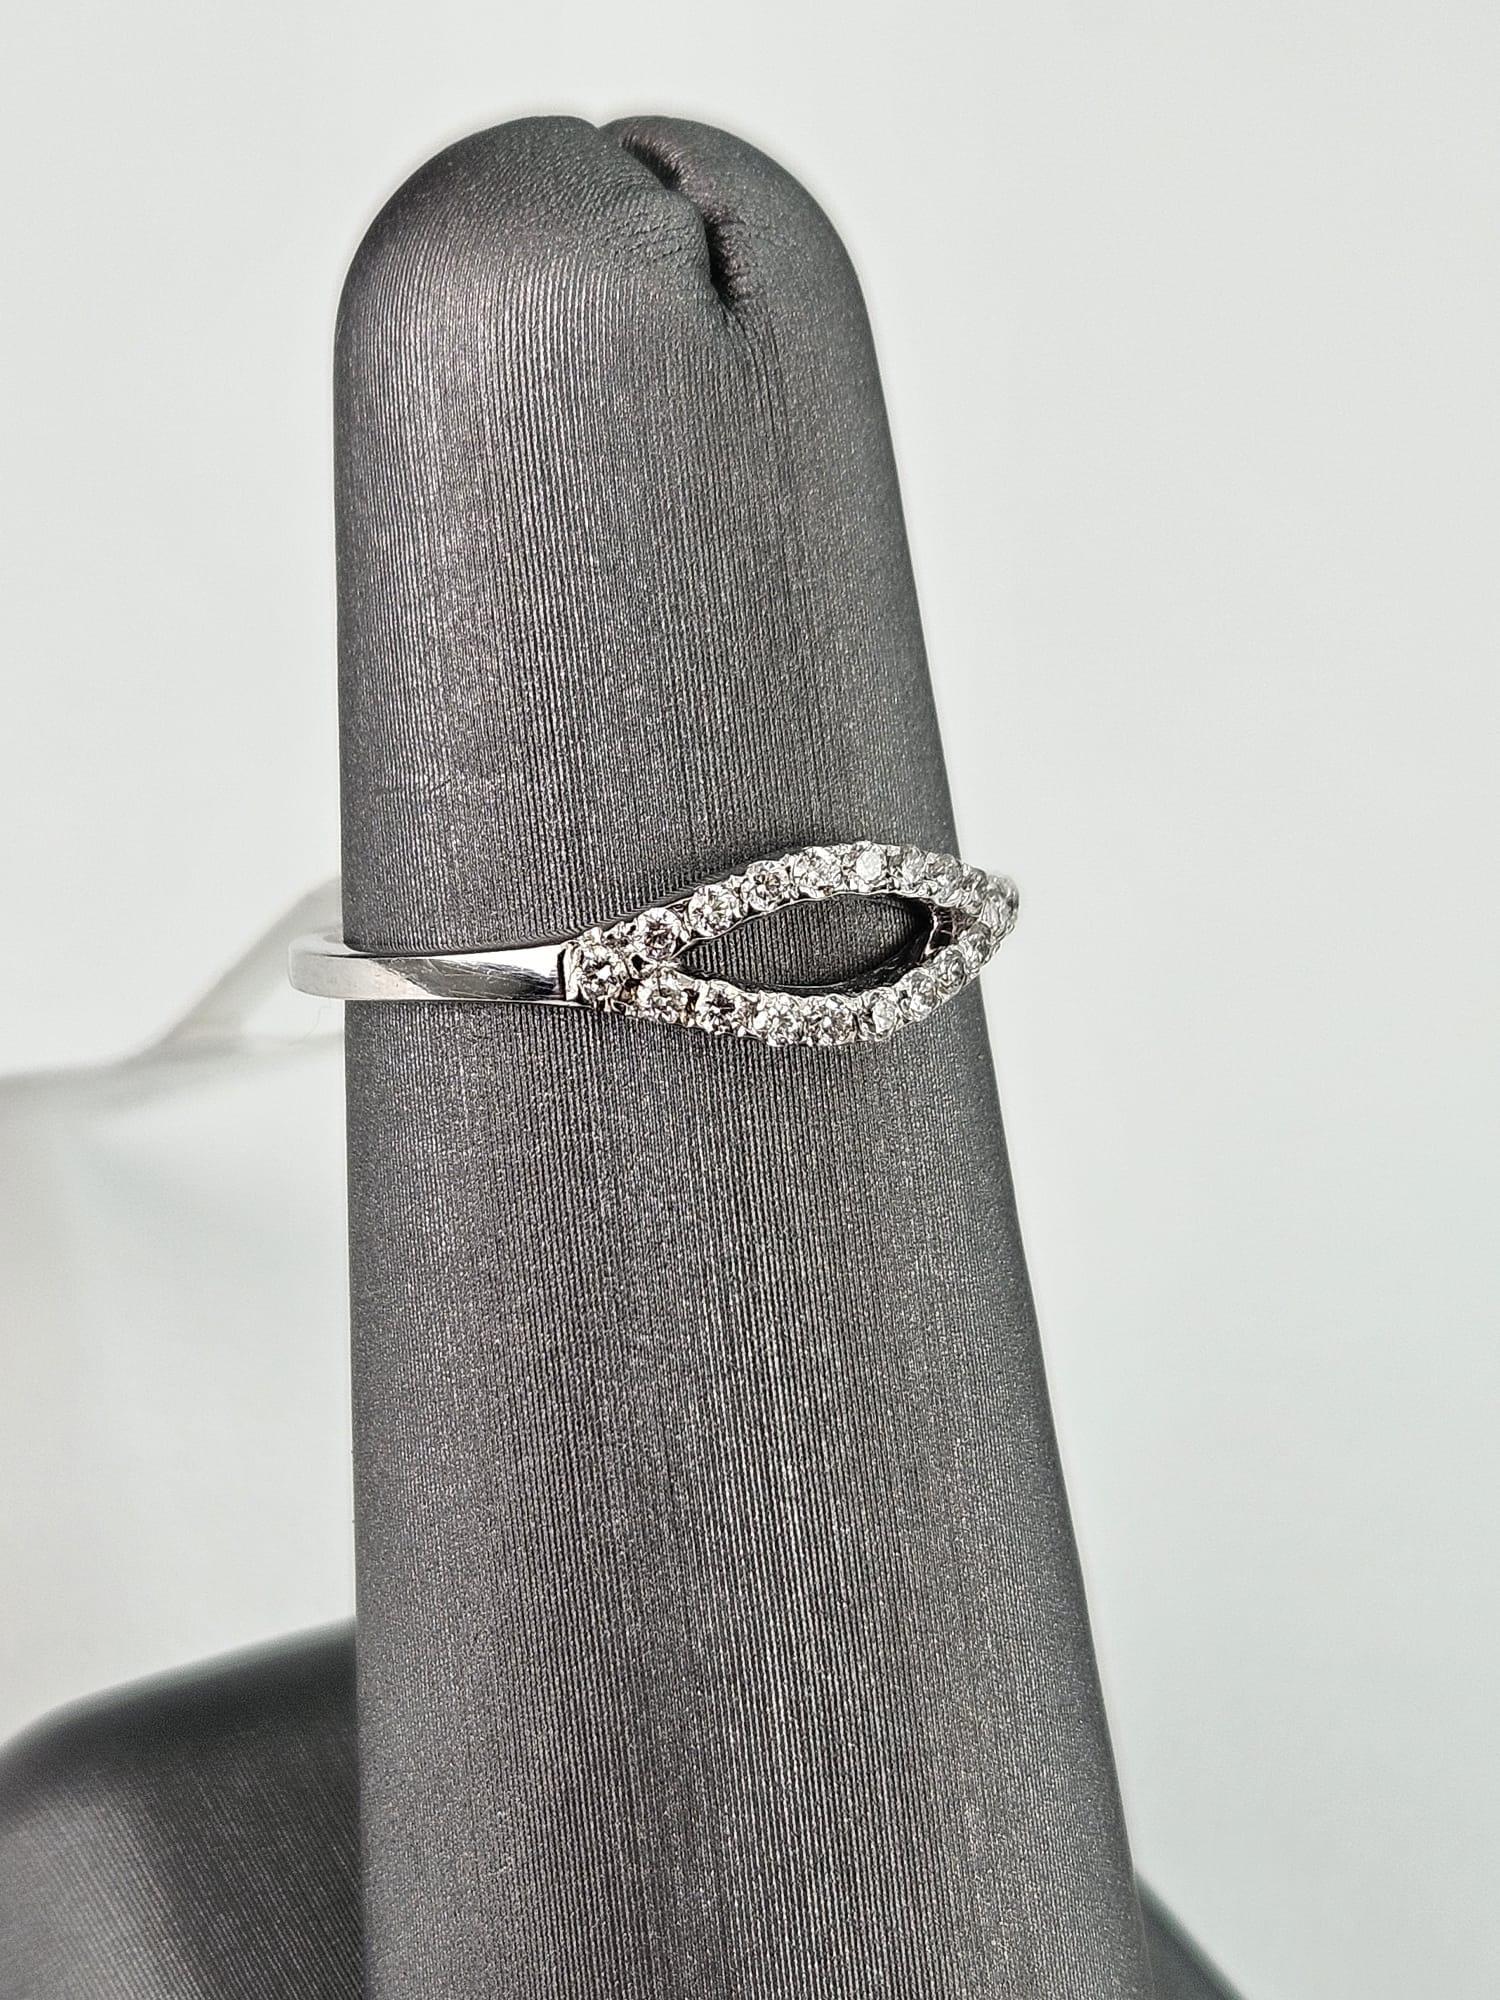 Introducing a uniquely elegant 0.20 carat White Diamond oval band ring, gracefully designed with an open oval shape in the middle, crafted in luminous white gold. This exquisite ring features shimmering White Diamonds, totaling 0.20 carats,